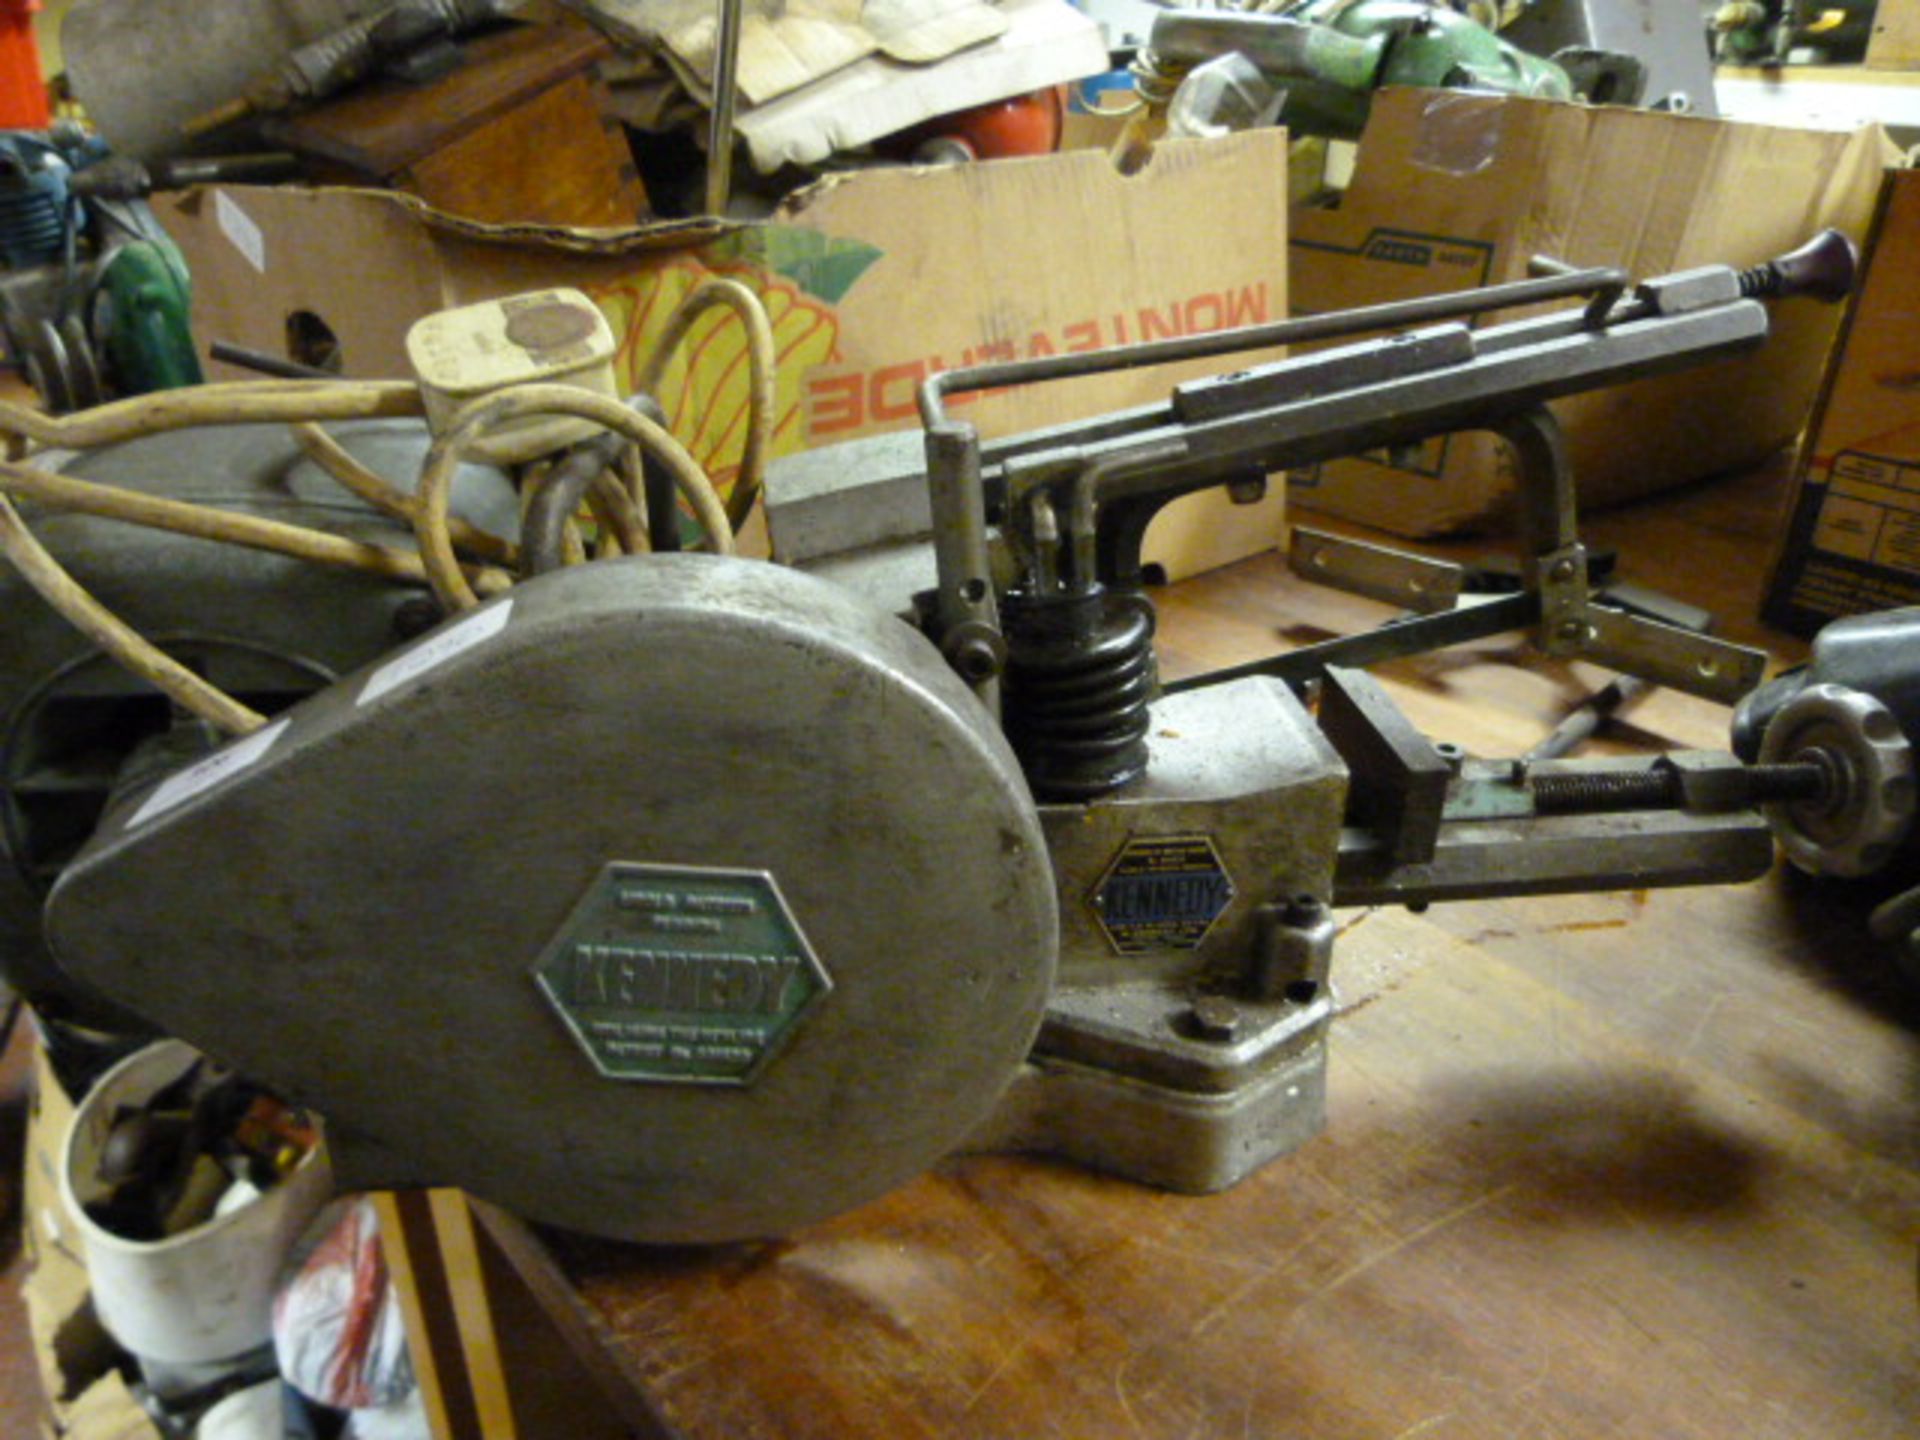 Kennedy Electric Bench/model Makers Hack Saw